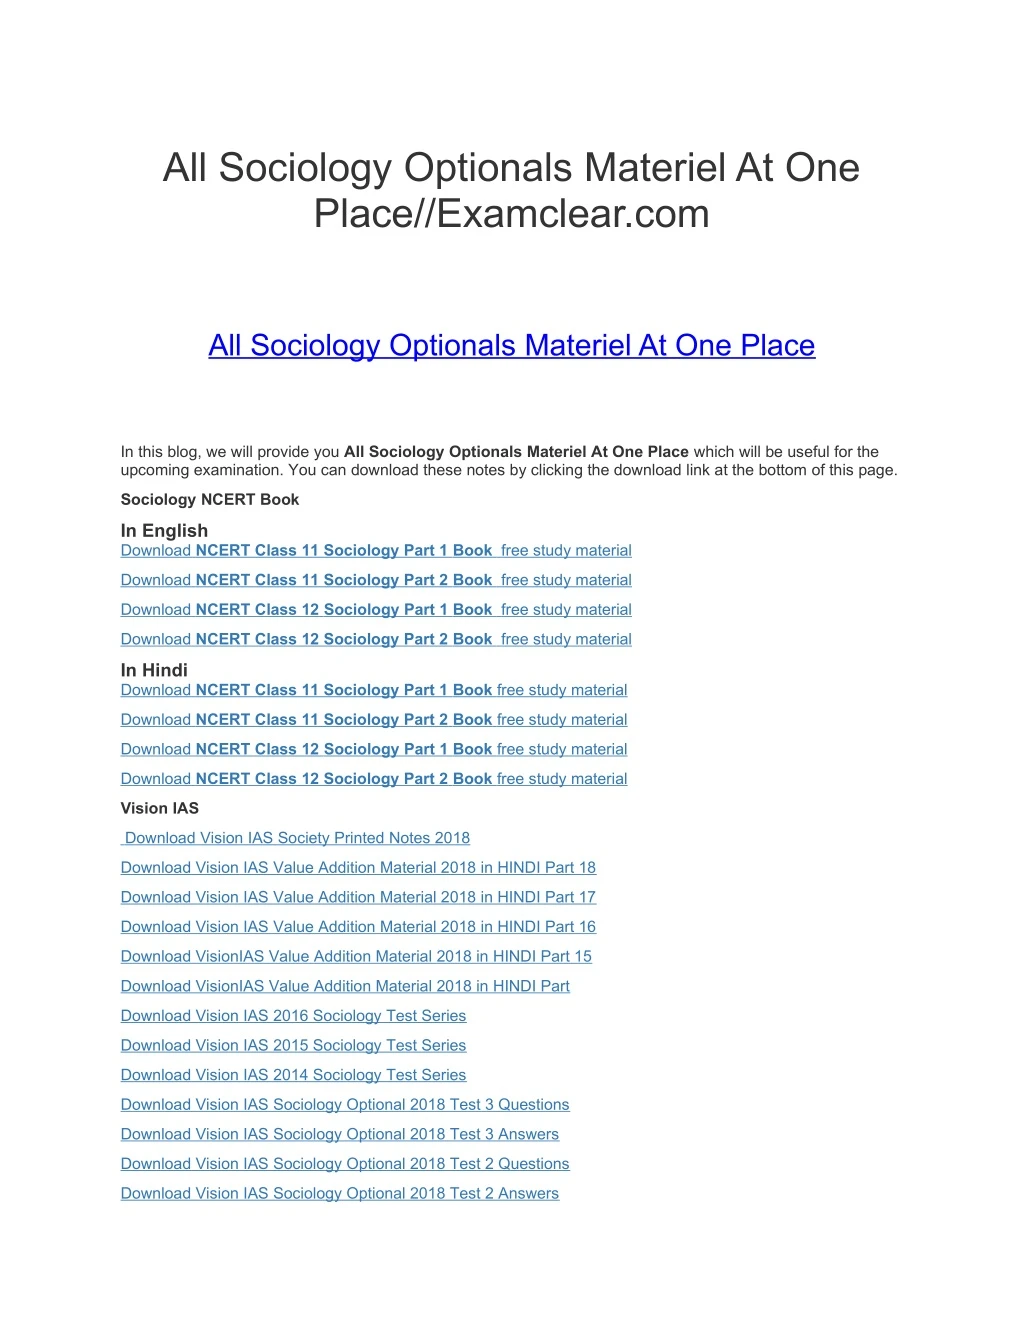 all sociology optionals materiel at one place